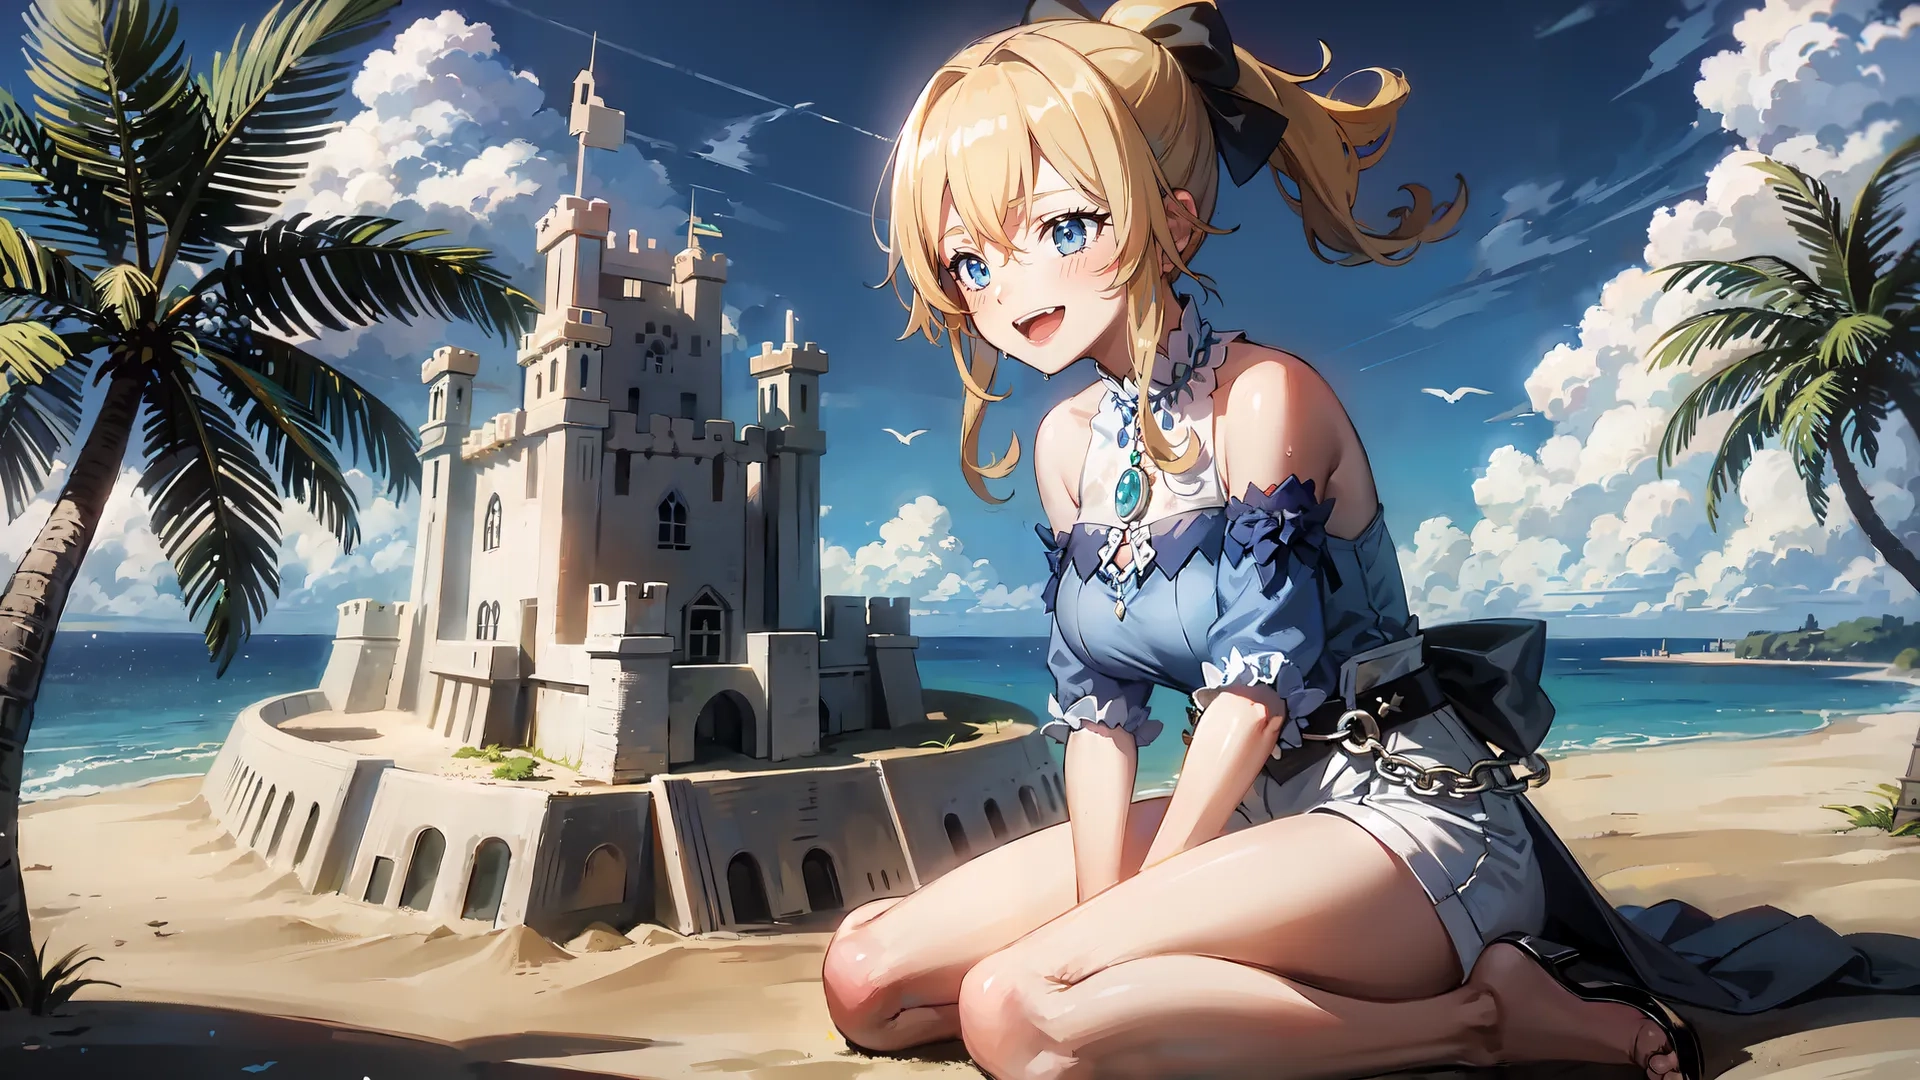 a girl sits in front of some sand sculptures looking at the ocean and palm trees, near a beach and castle while another looks like she is sitting next to them
